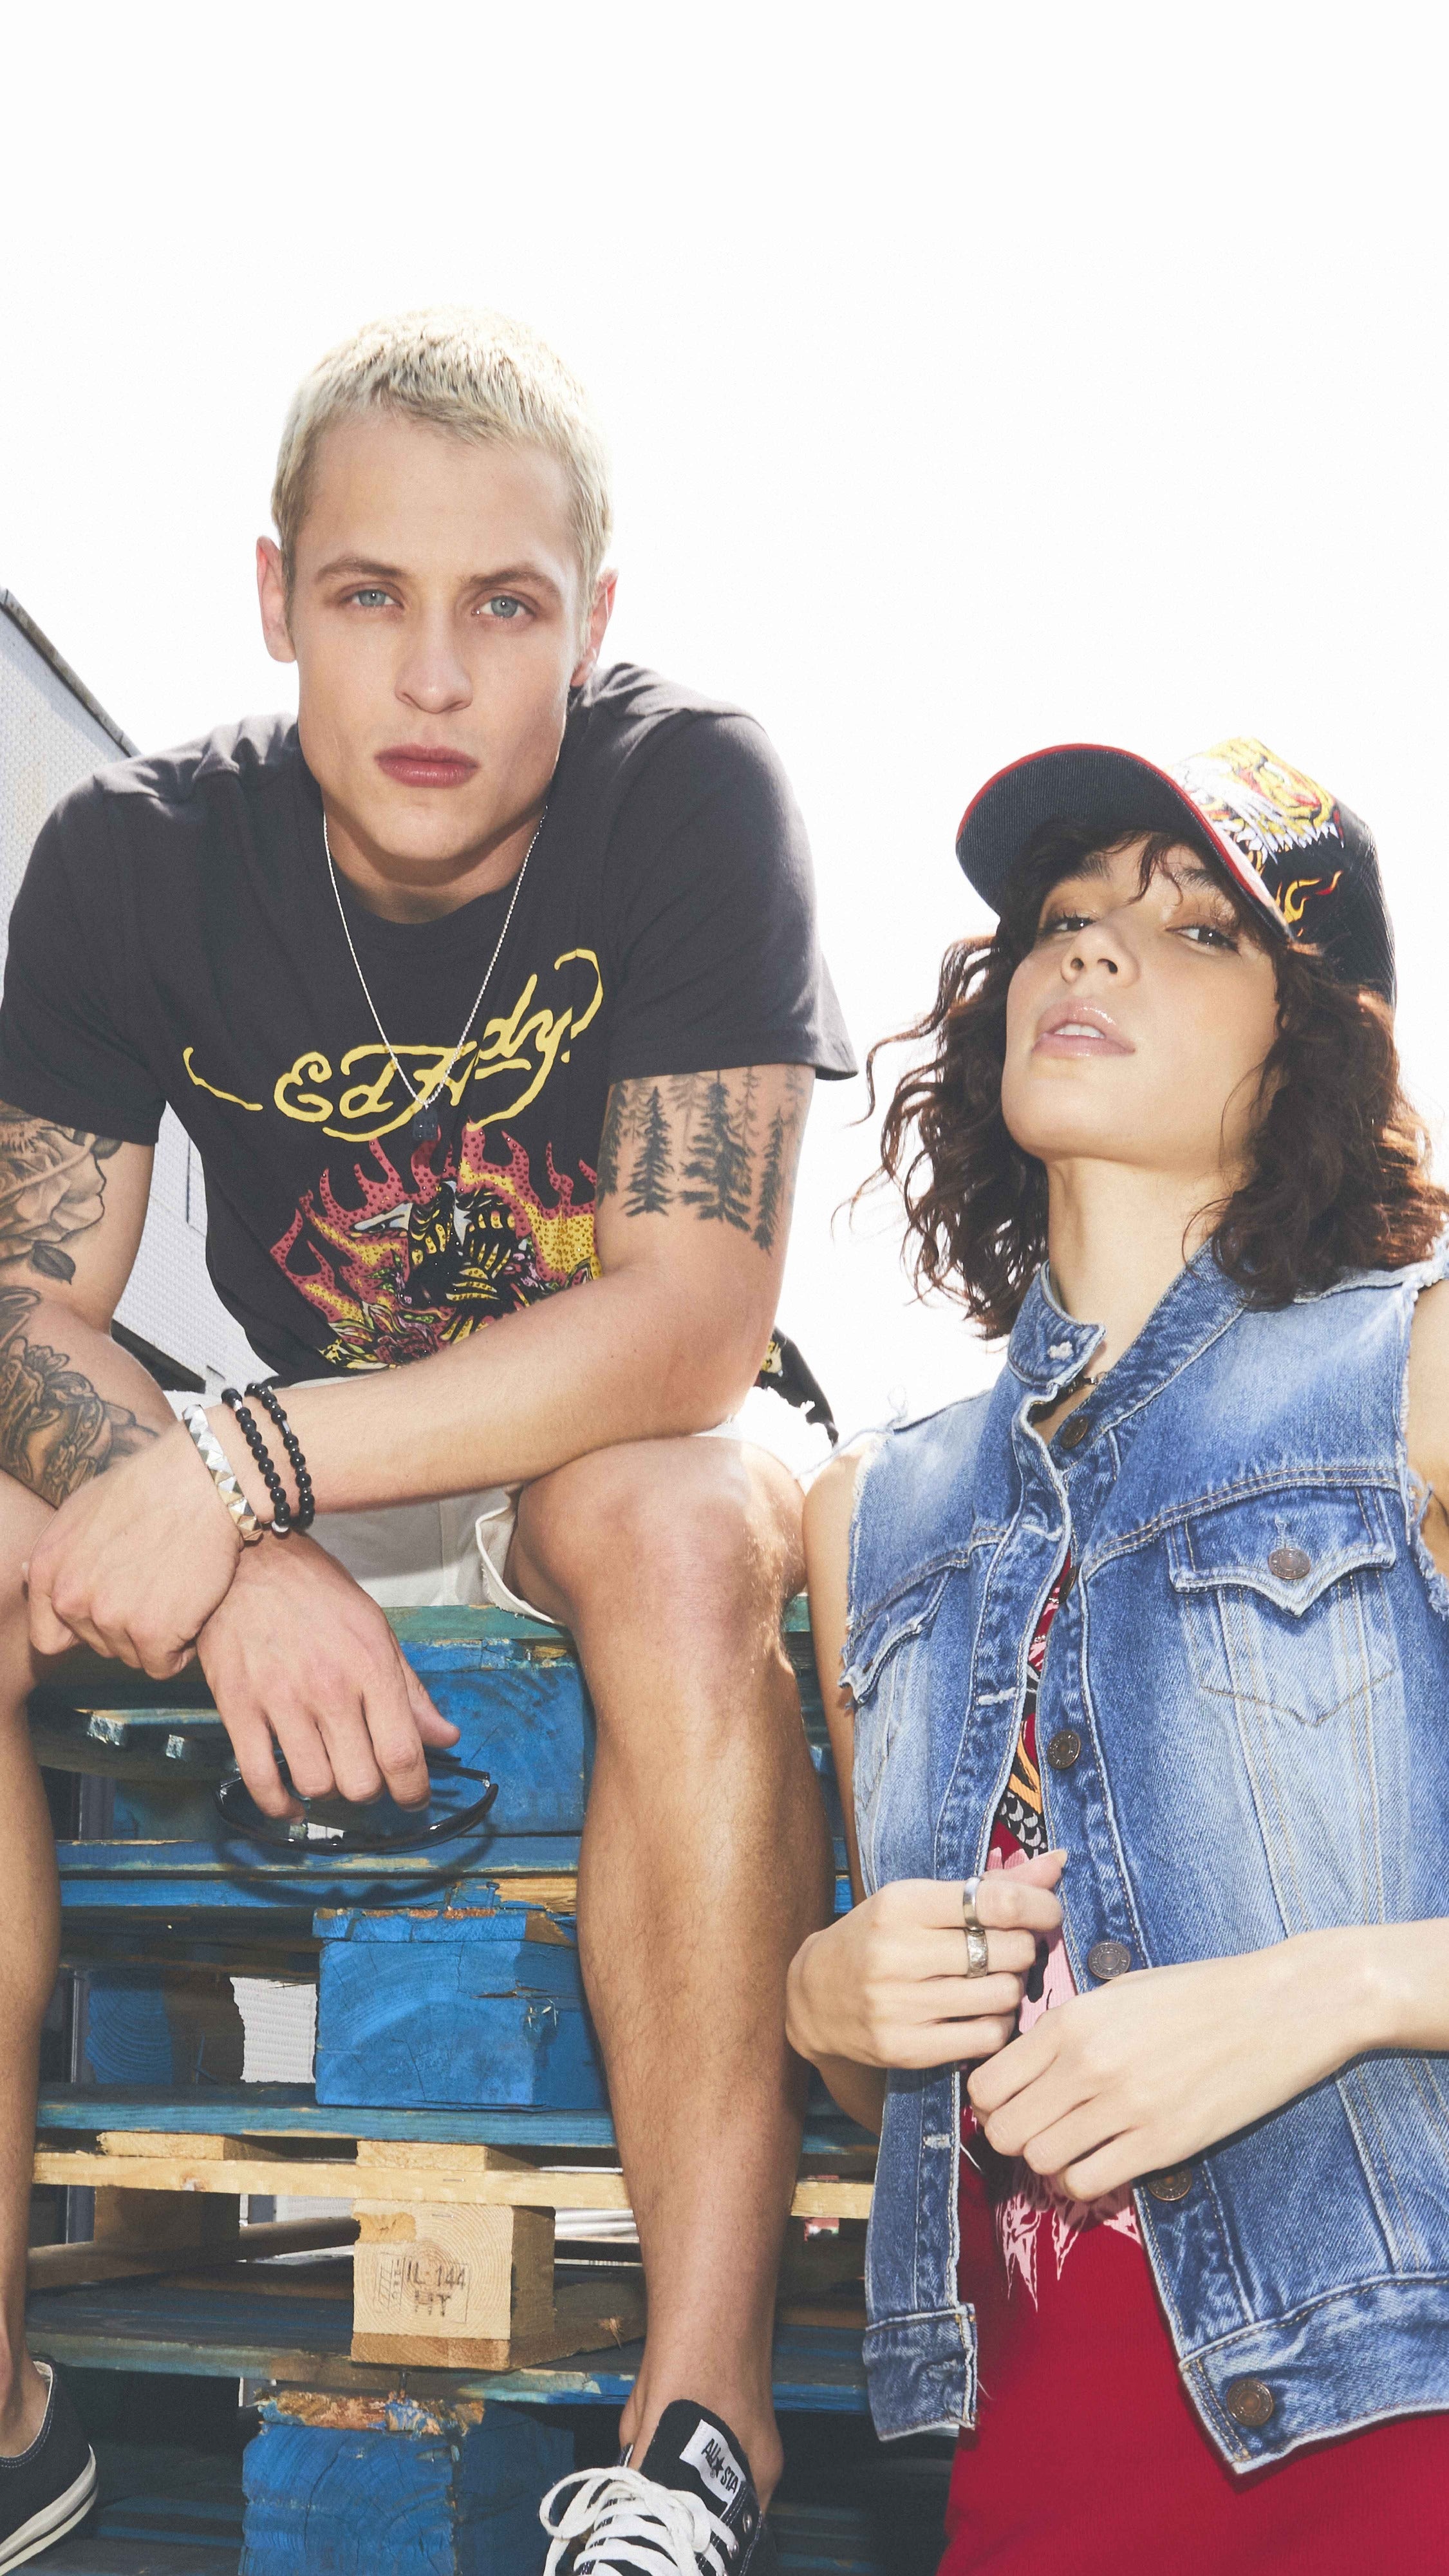 Ed Hardy Season Continues at Urban Outfitters